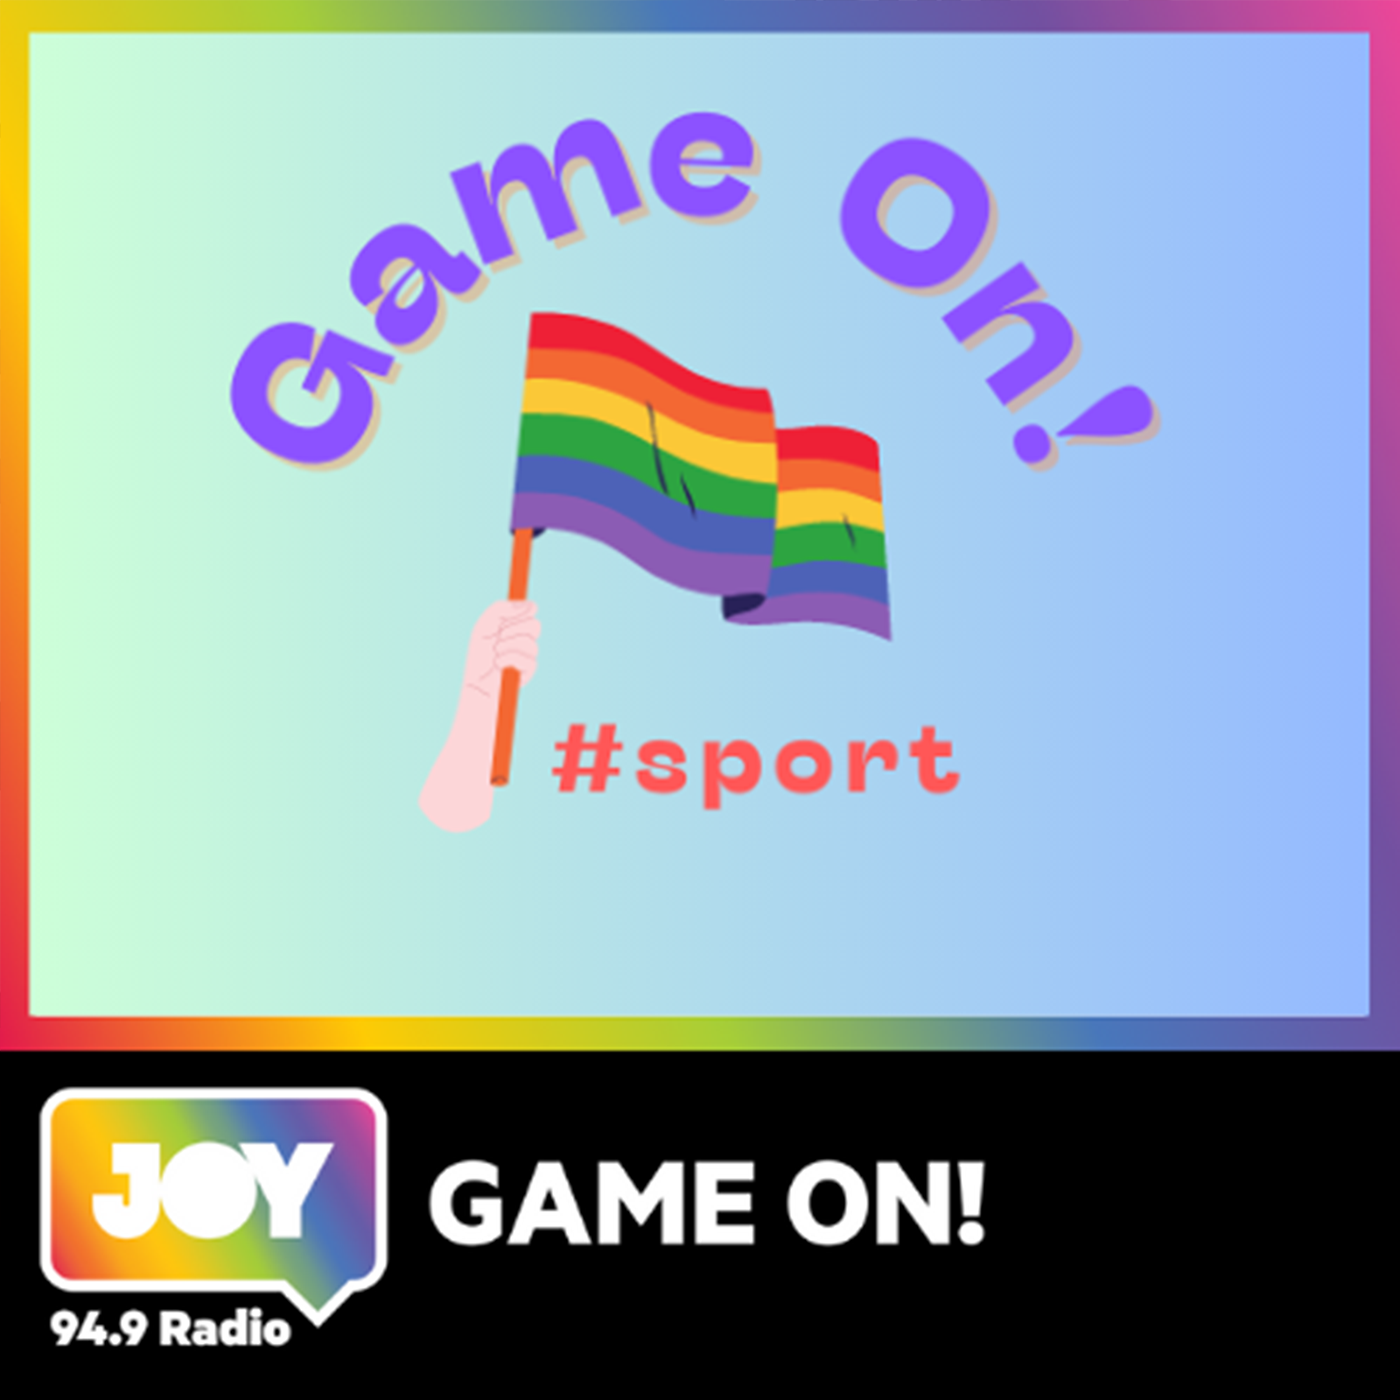 We’re getting our game on at NARC, the MQFF and the Gay Games Hong Kong